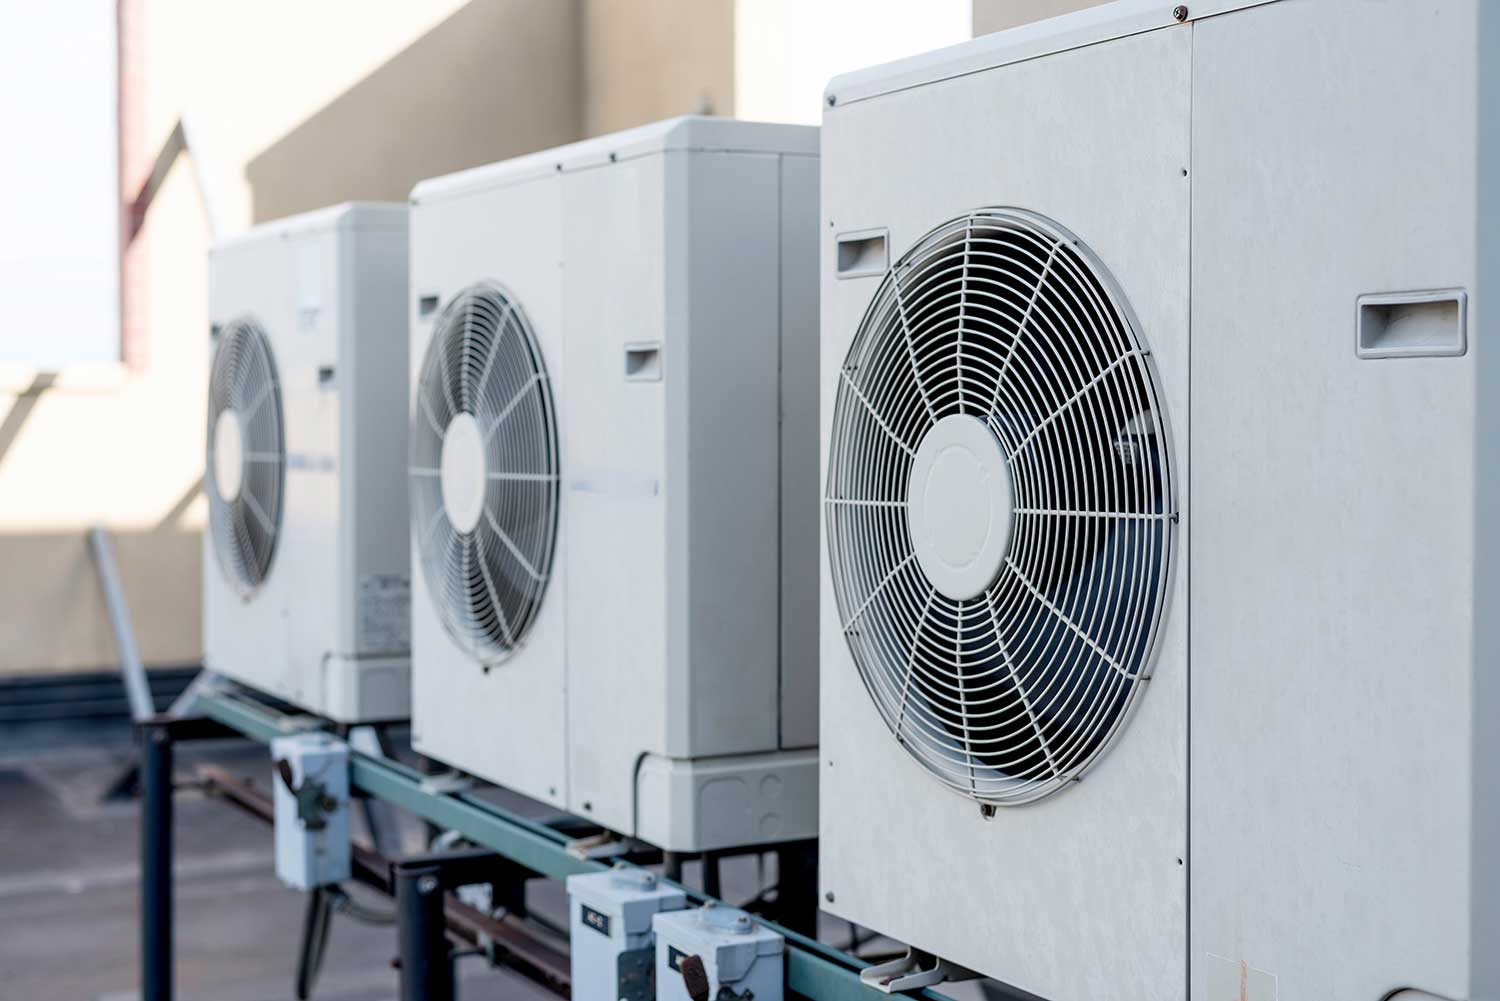 Replacing an Heating as well as A/C system for saving, efficiency and consistent cooling